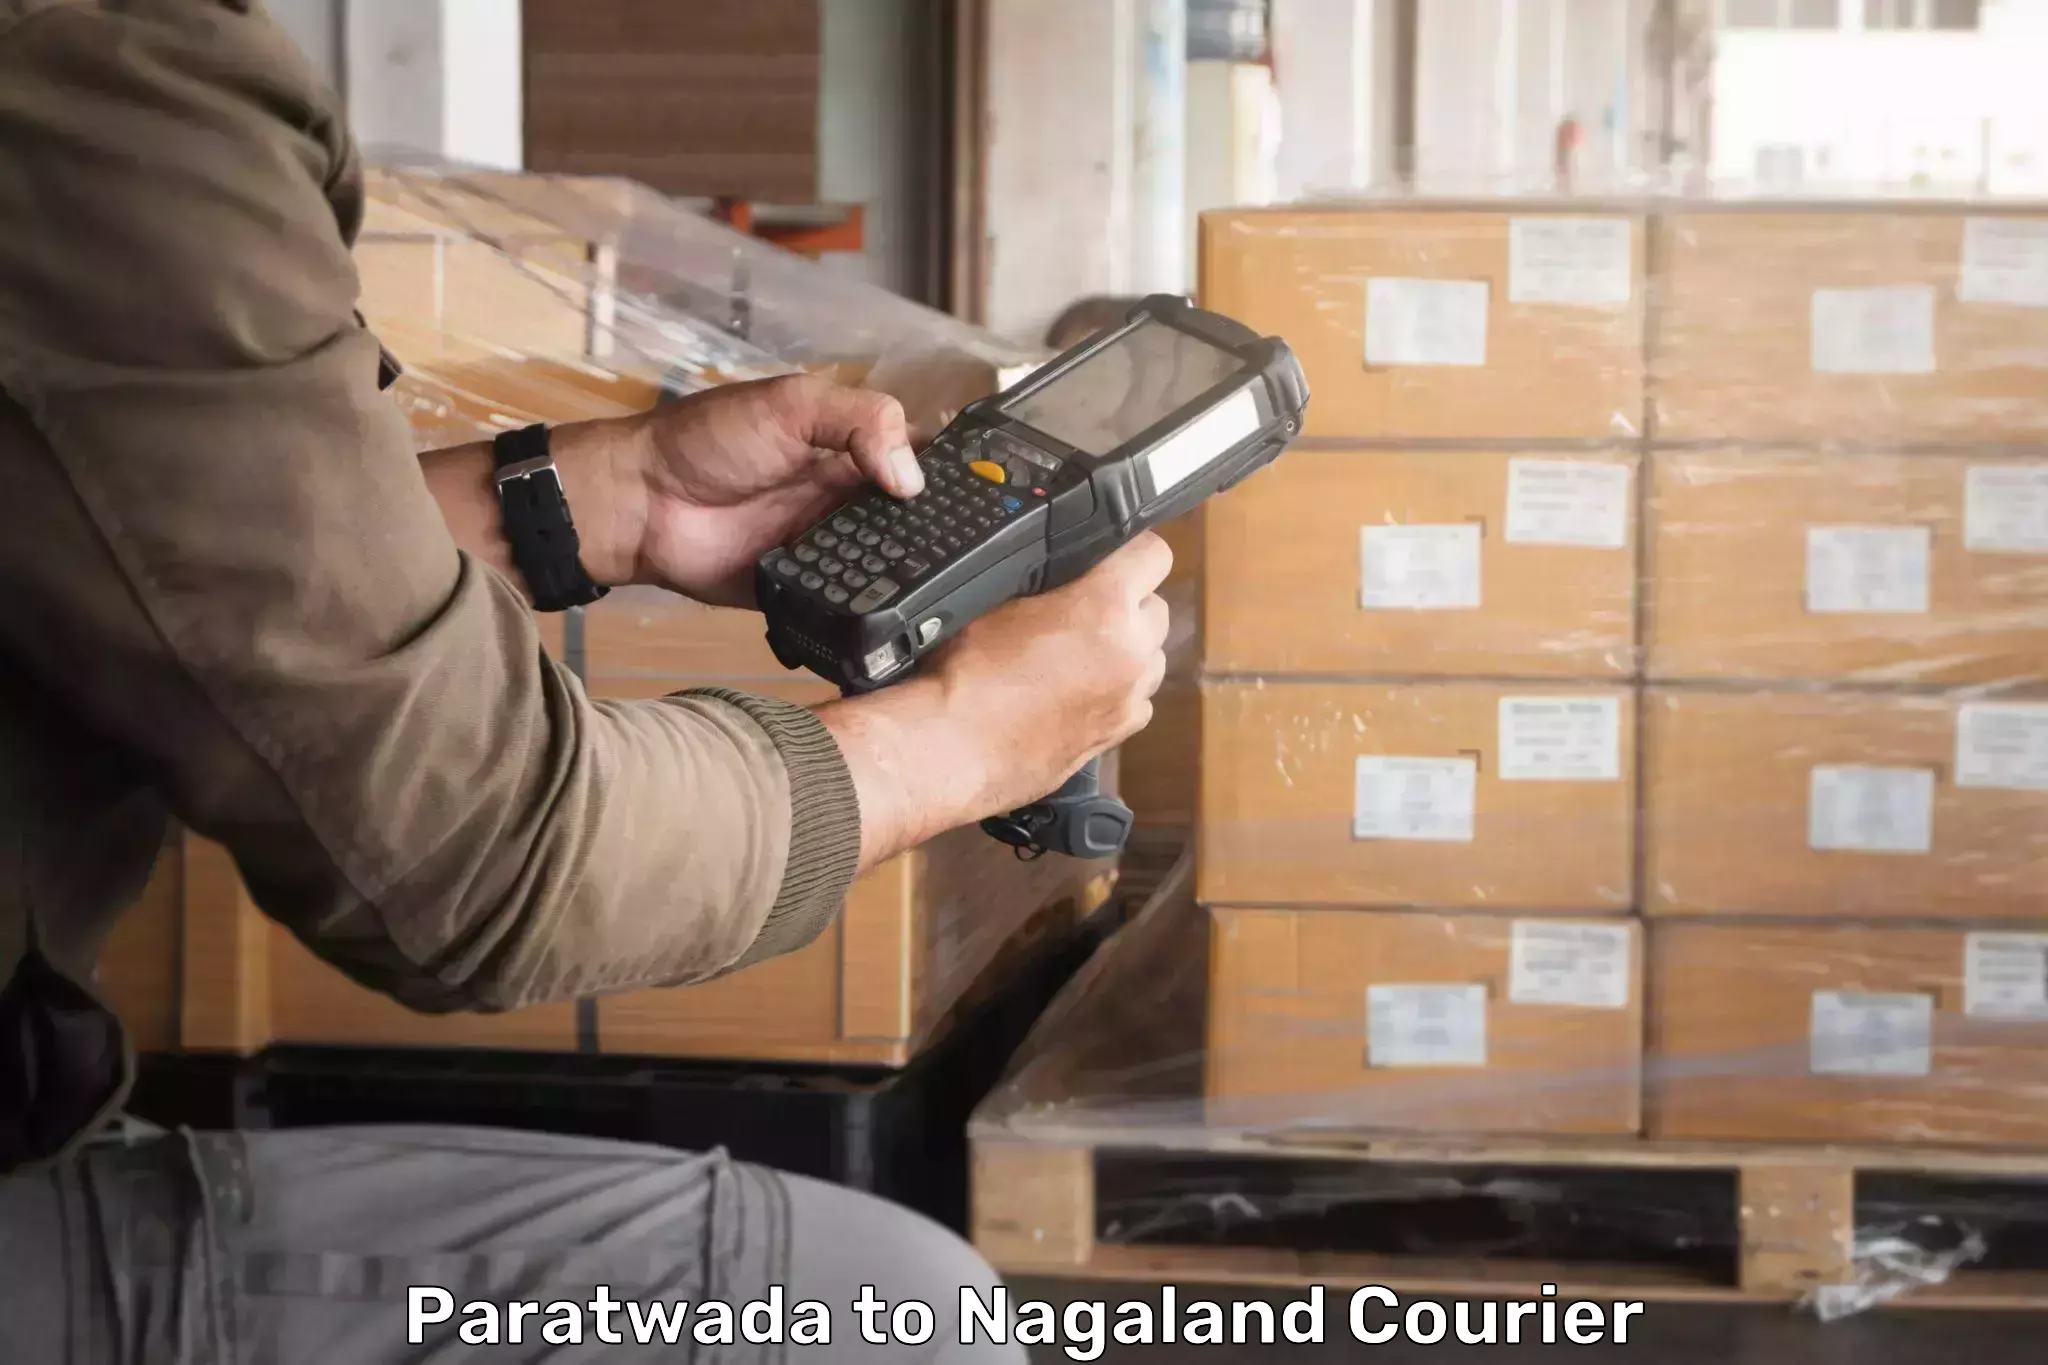 Multi-national courier services Paratwada to Kohima